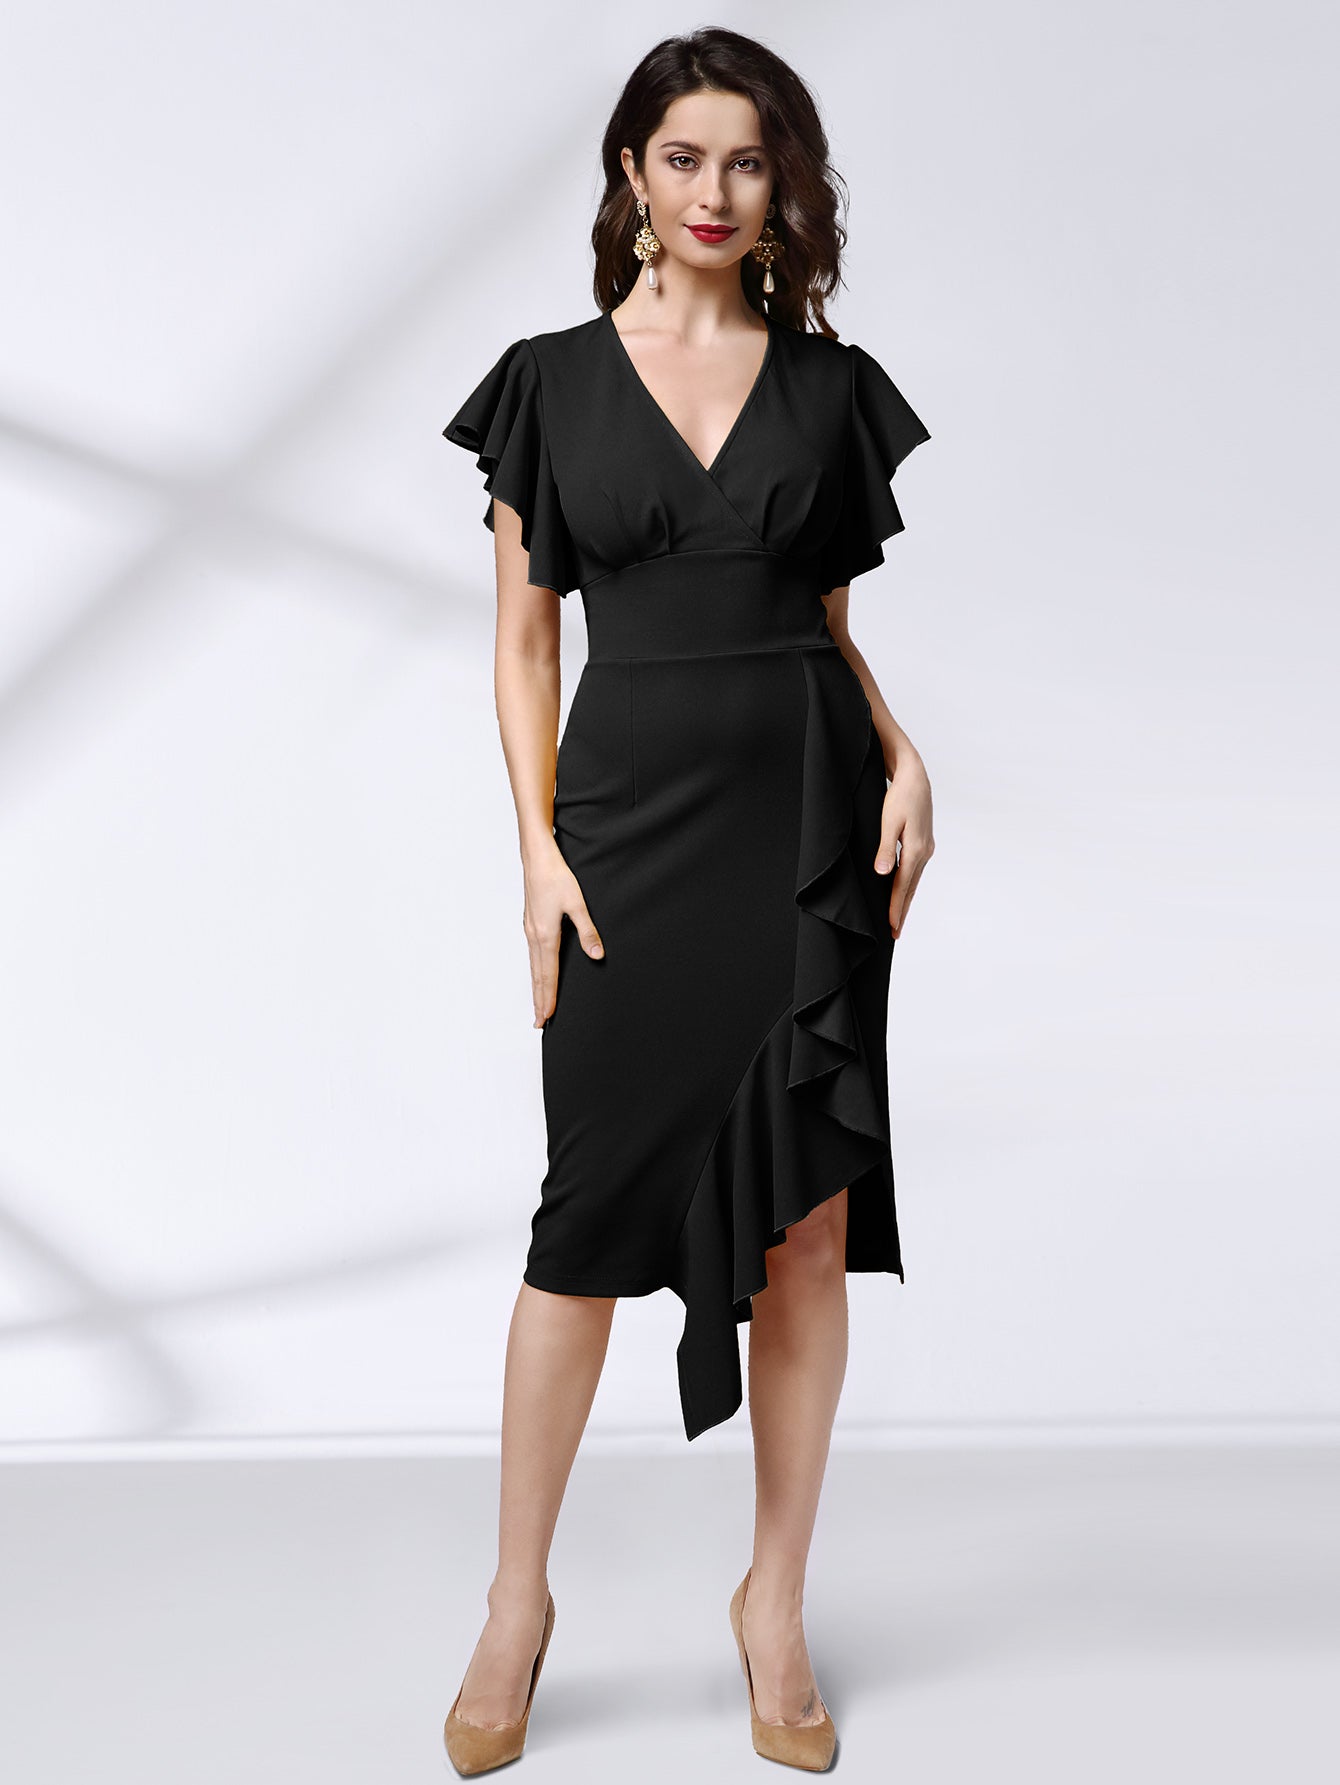 Knitee Women's Deep-V Neck Ruffle Sleeves Cocktail Party Pencil Slit Dress